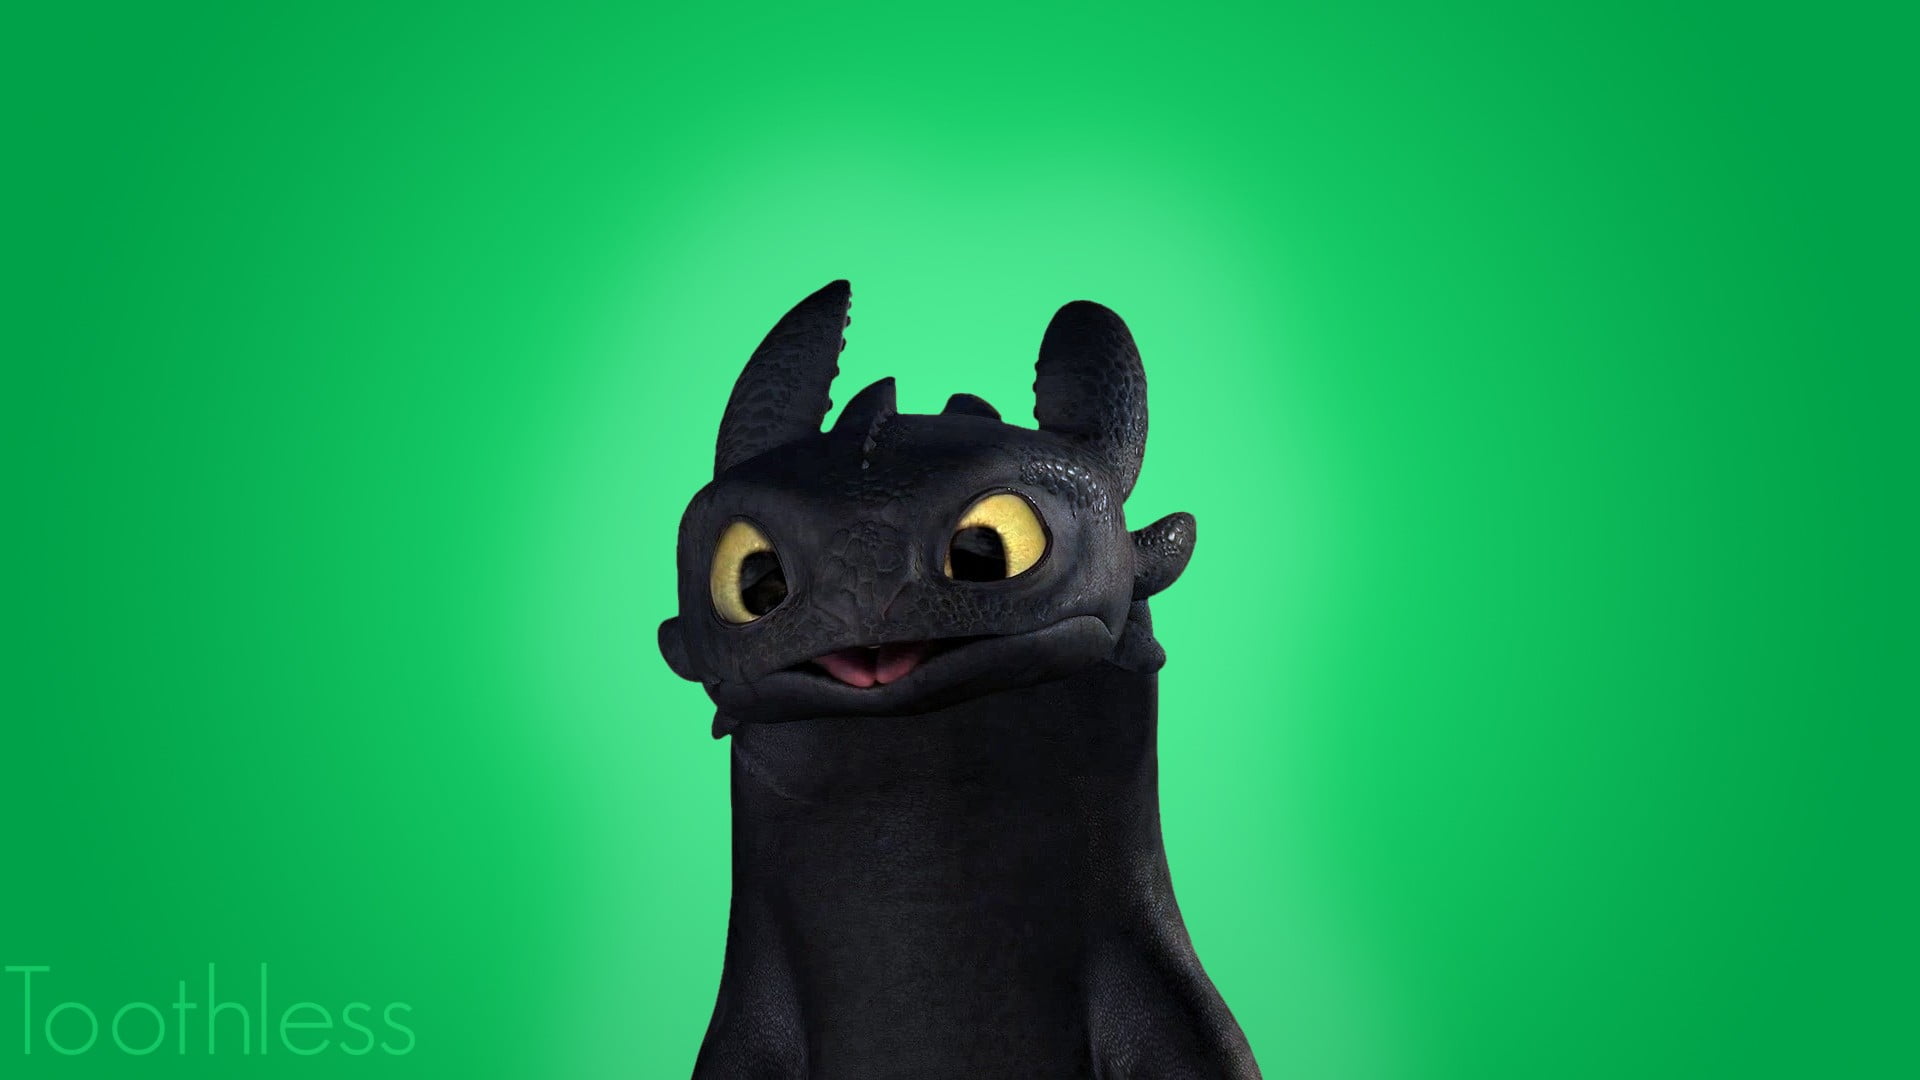 Toothless Wallpaper HD (75+ images)